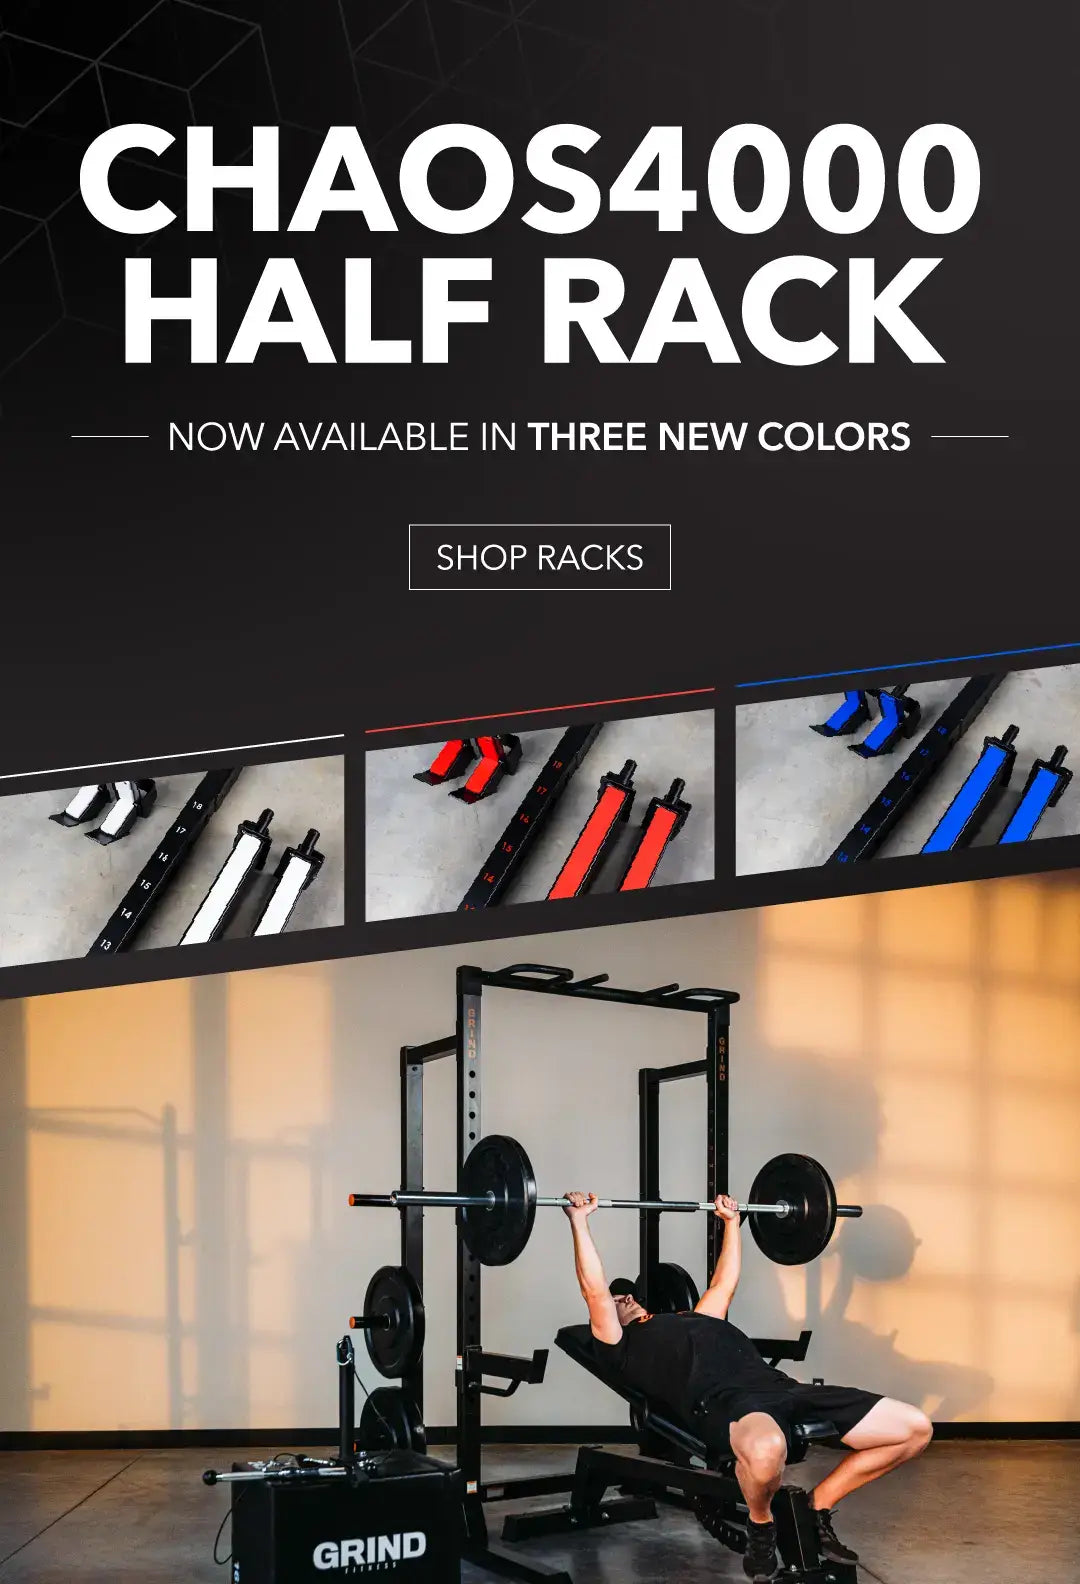 Chaos4000 Half Rack New Colors Available